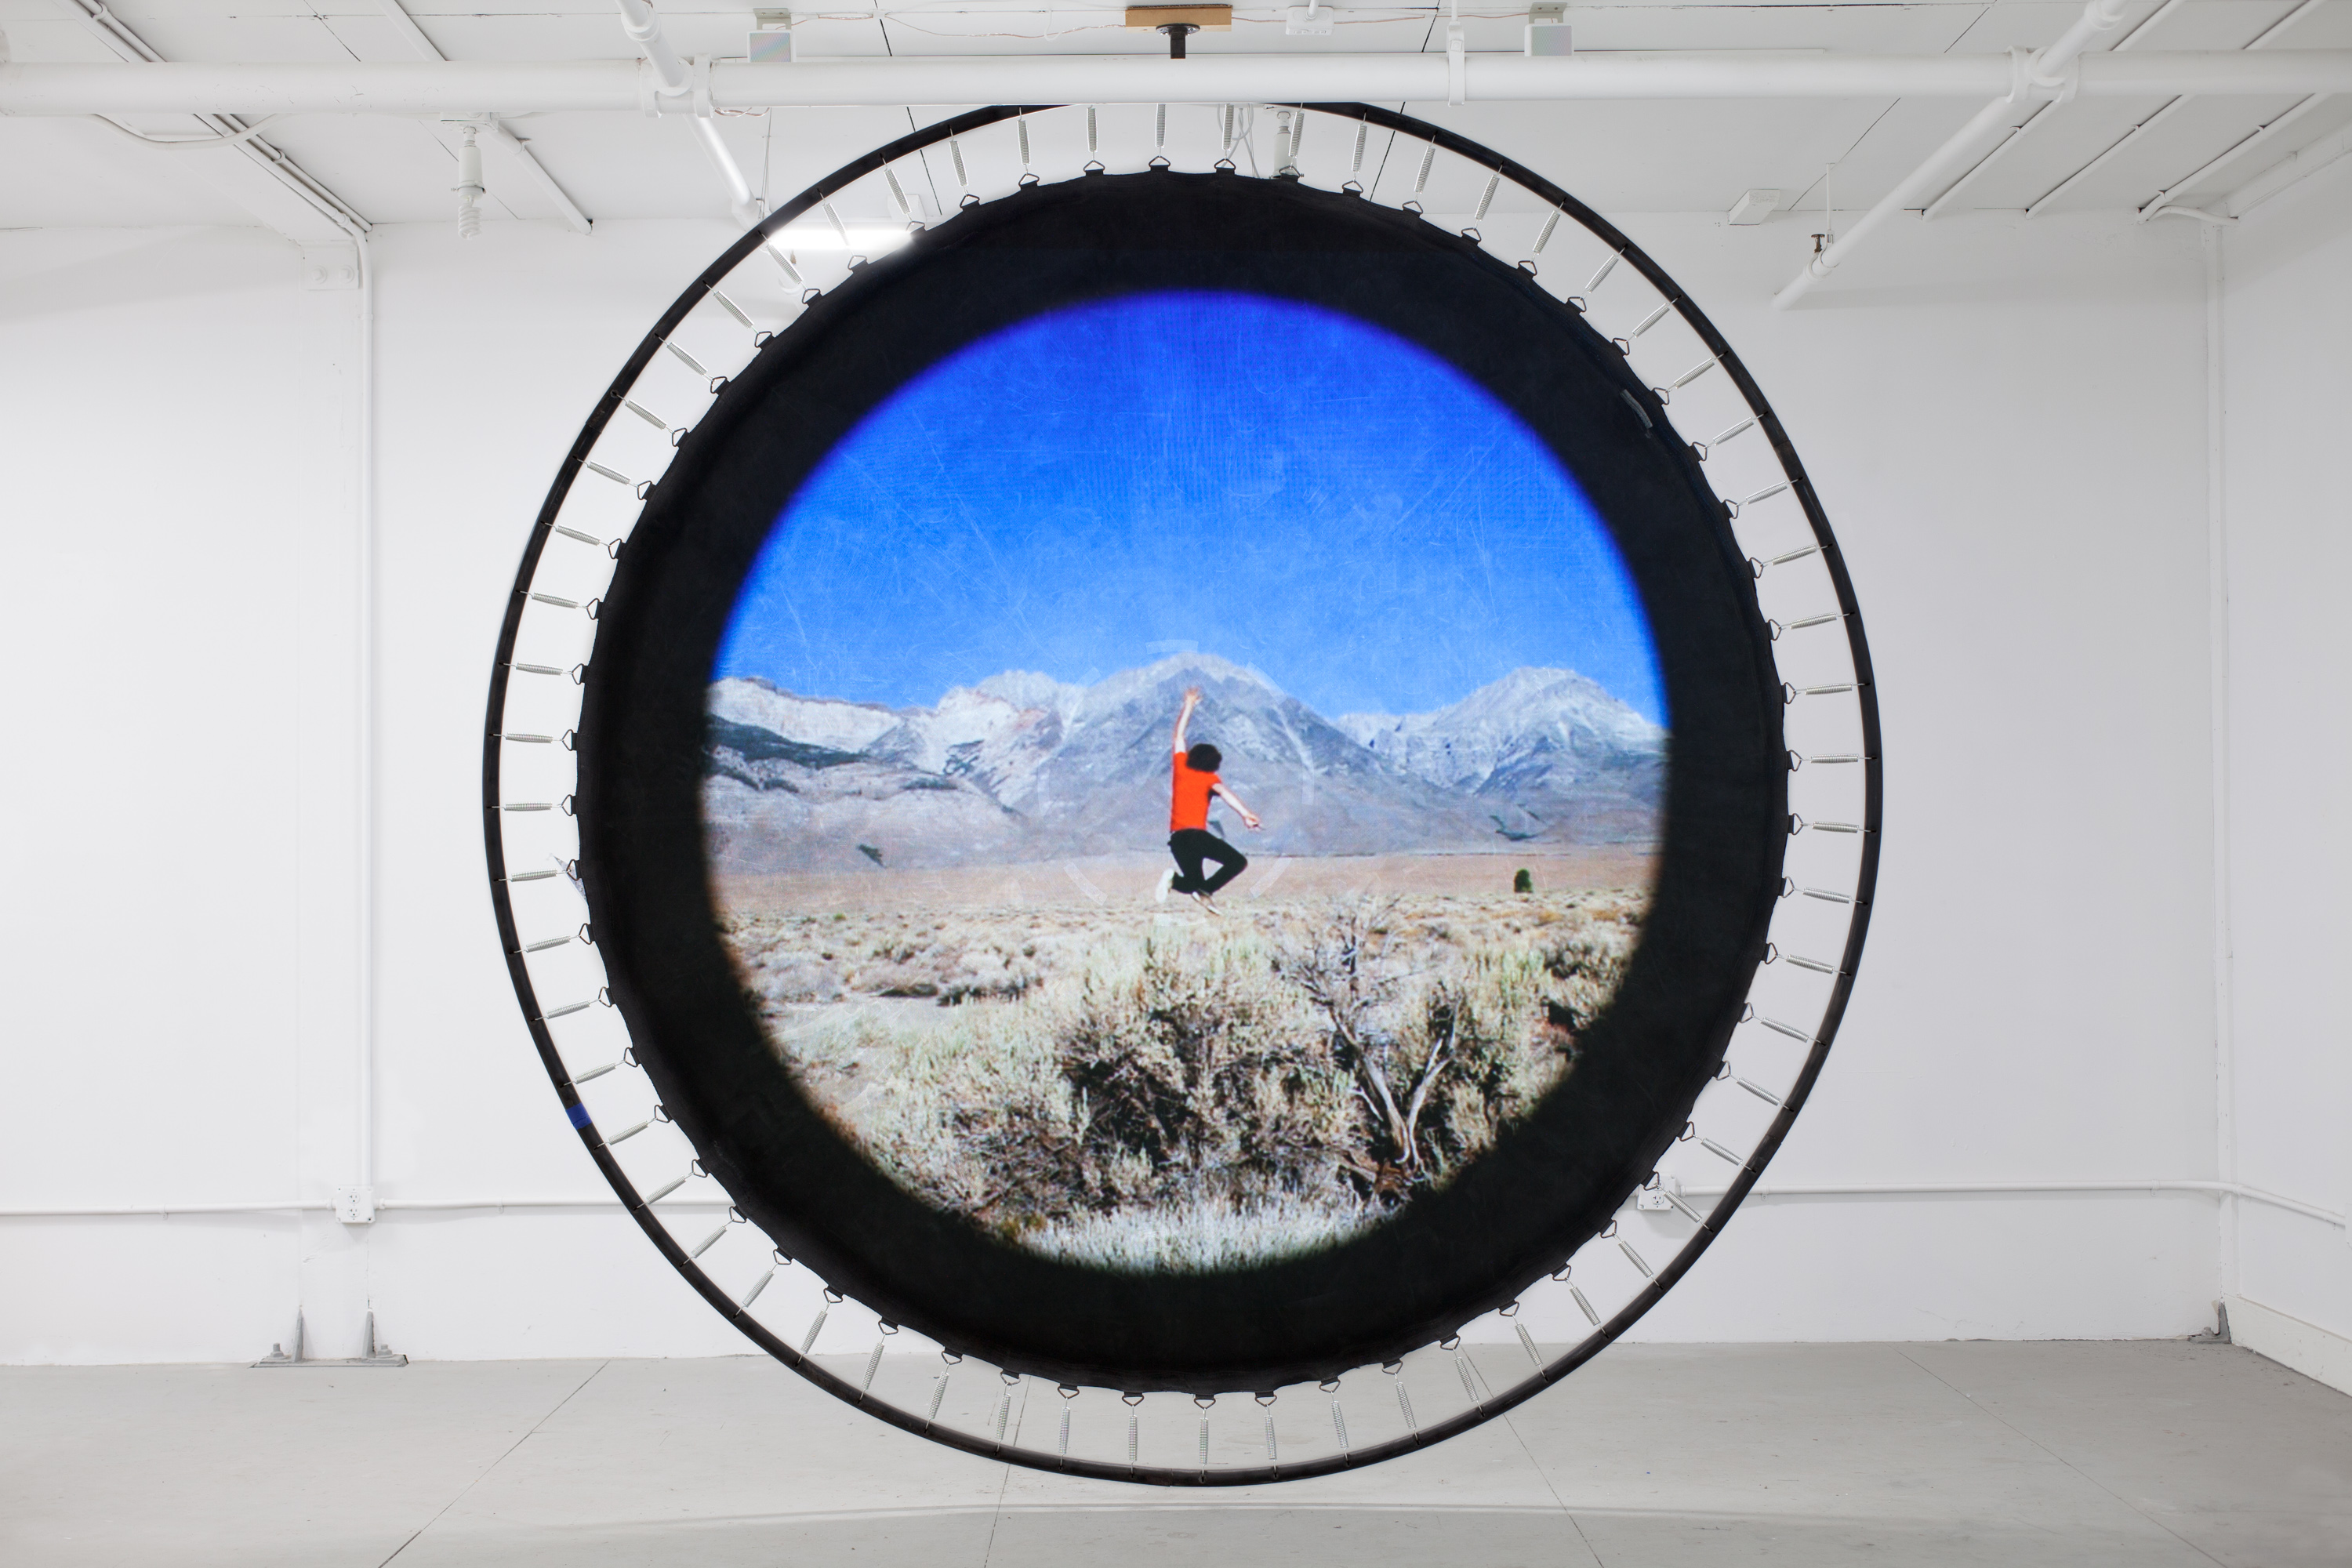 Trampoline hanging from a gallery ceiling with the image of a person jumping in a landscape projected onto it